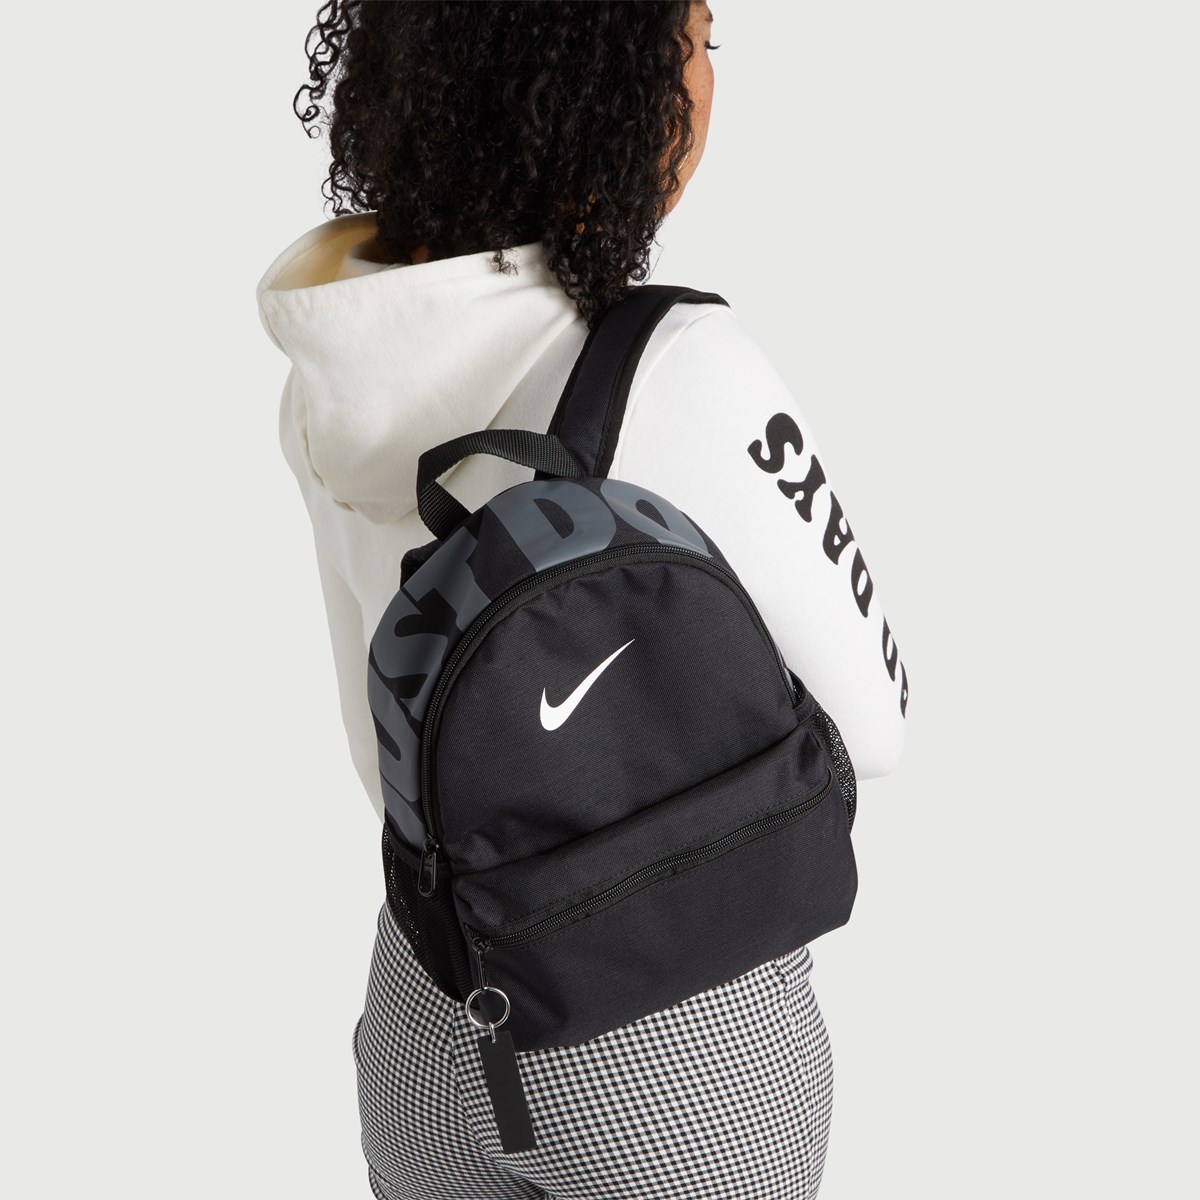 nike small backpack Online Shopping for 